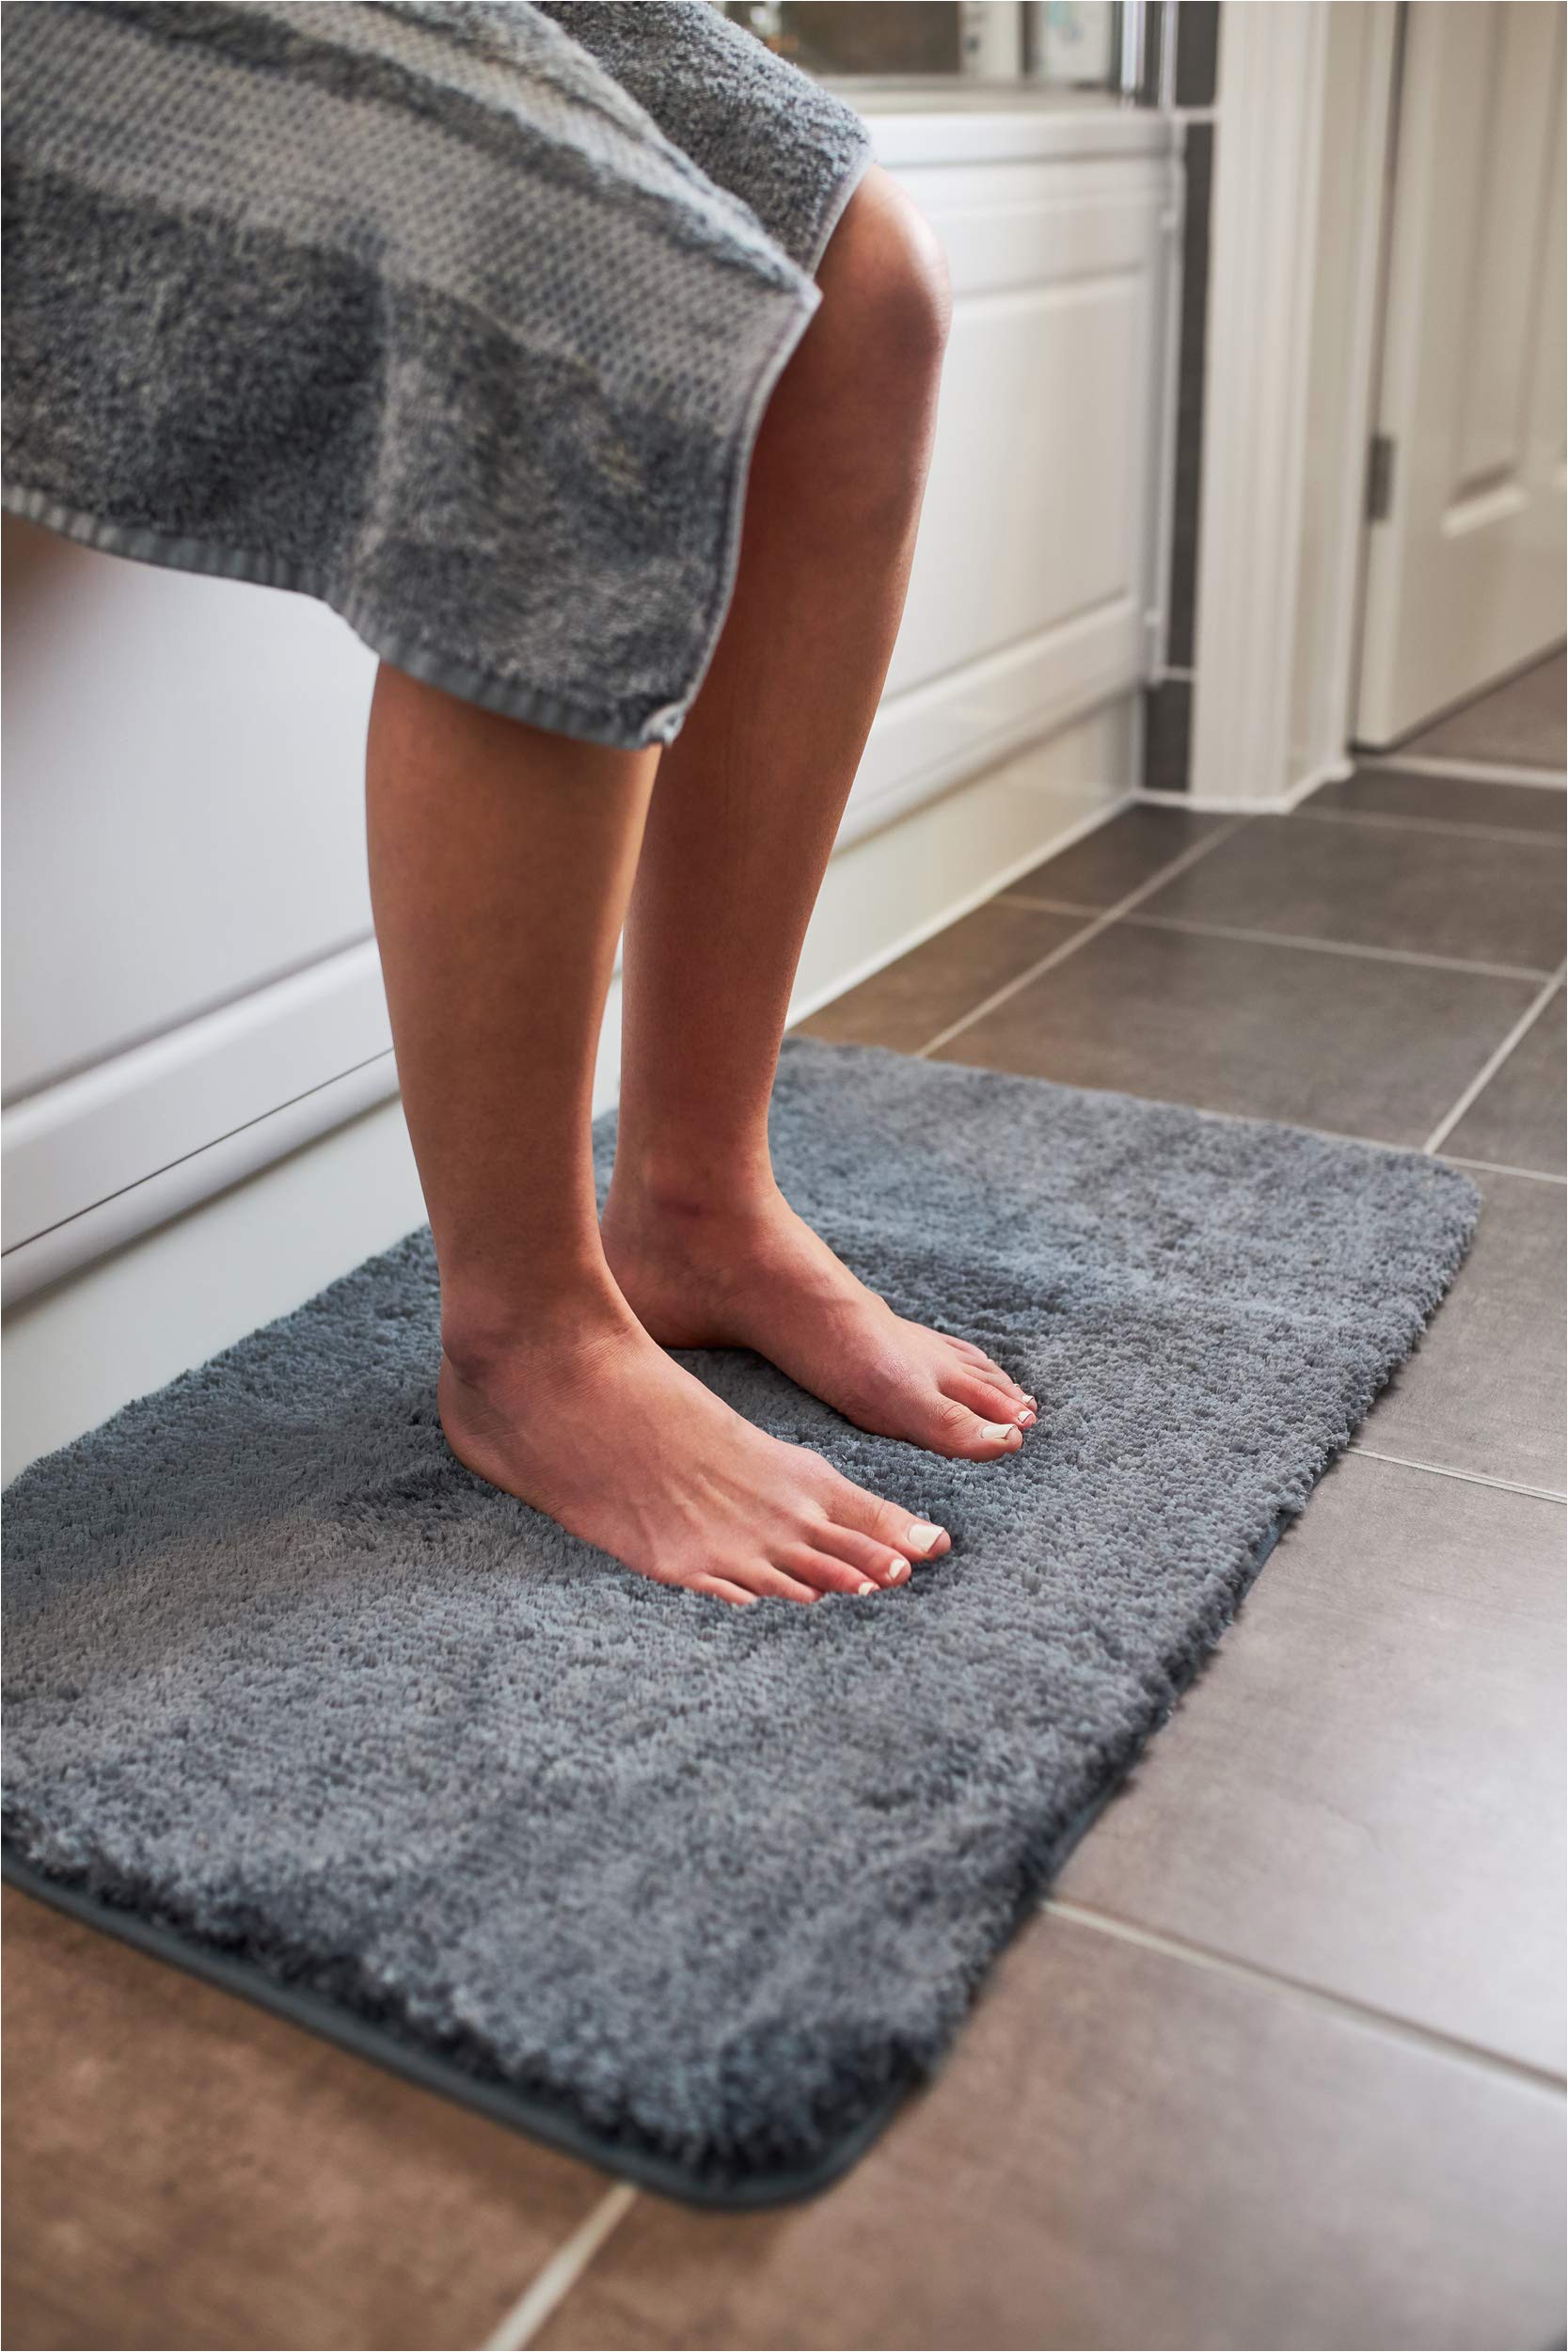 Best Washable Bathroom Rugs Luxury Grey Bath Mat Microfiber Non Slip Bath Rug with Super soft Absorbent Dry Fast Design for Bath and Shower